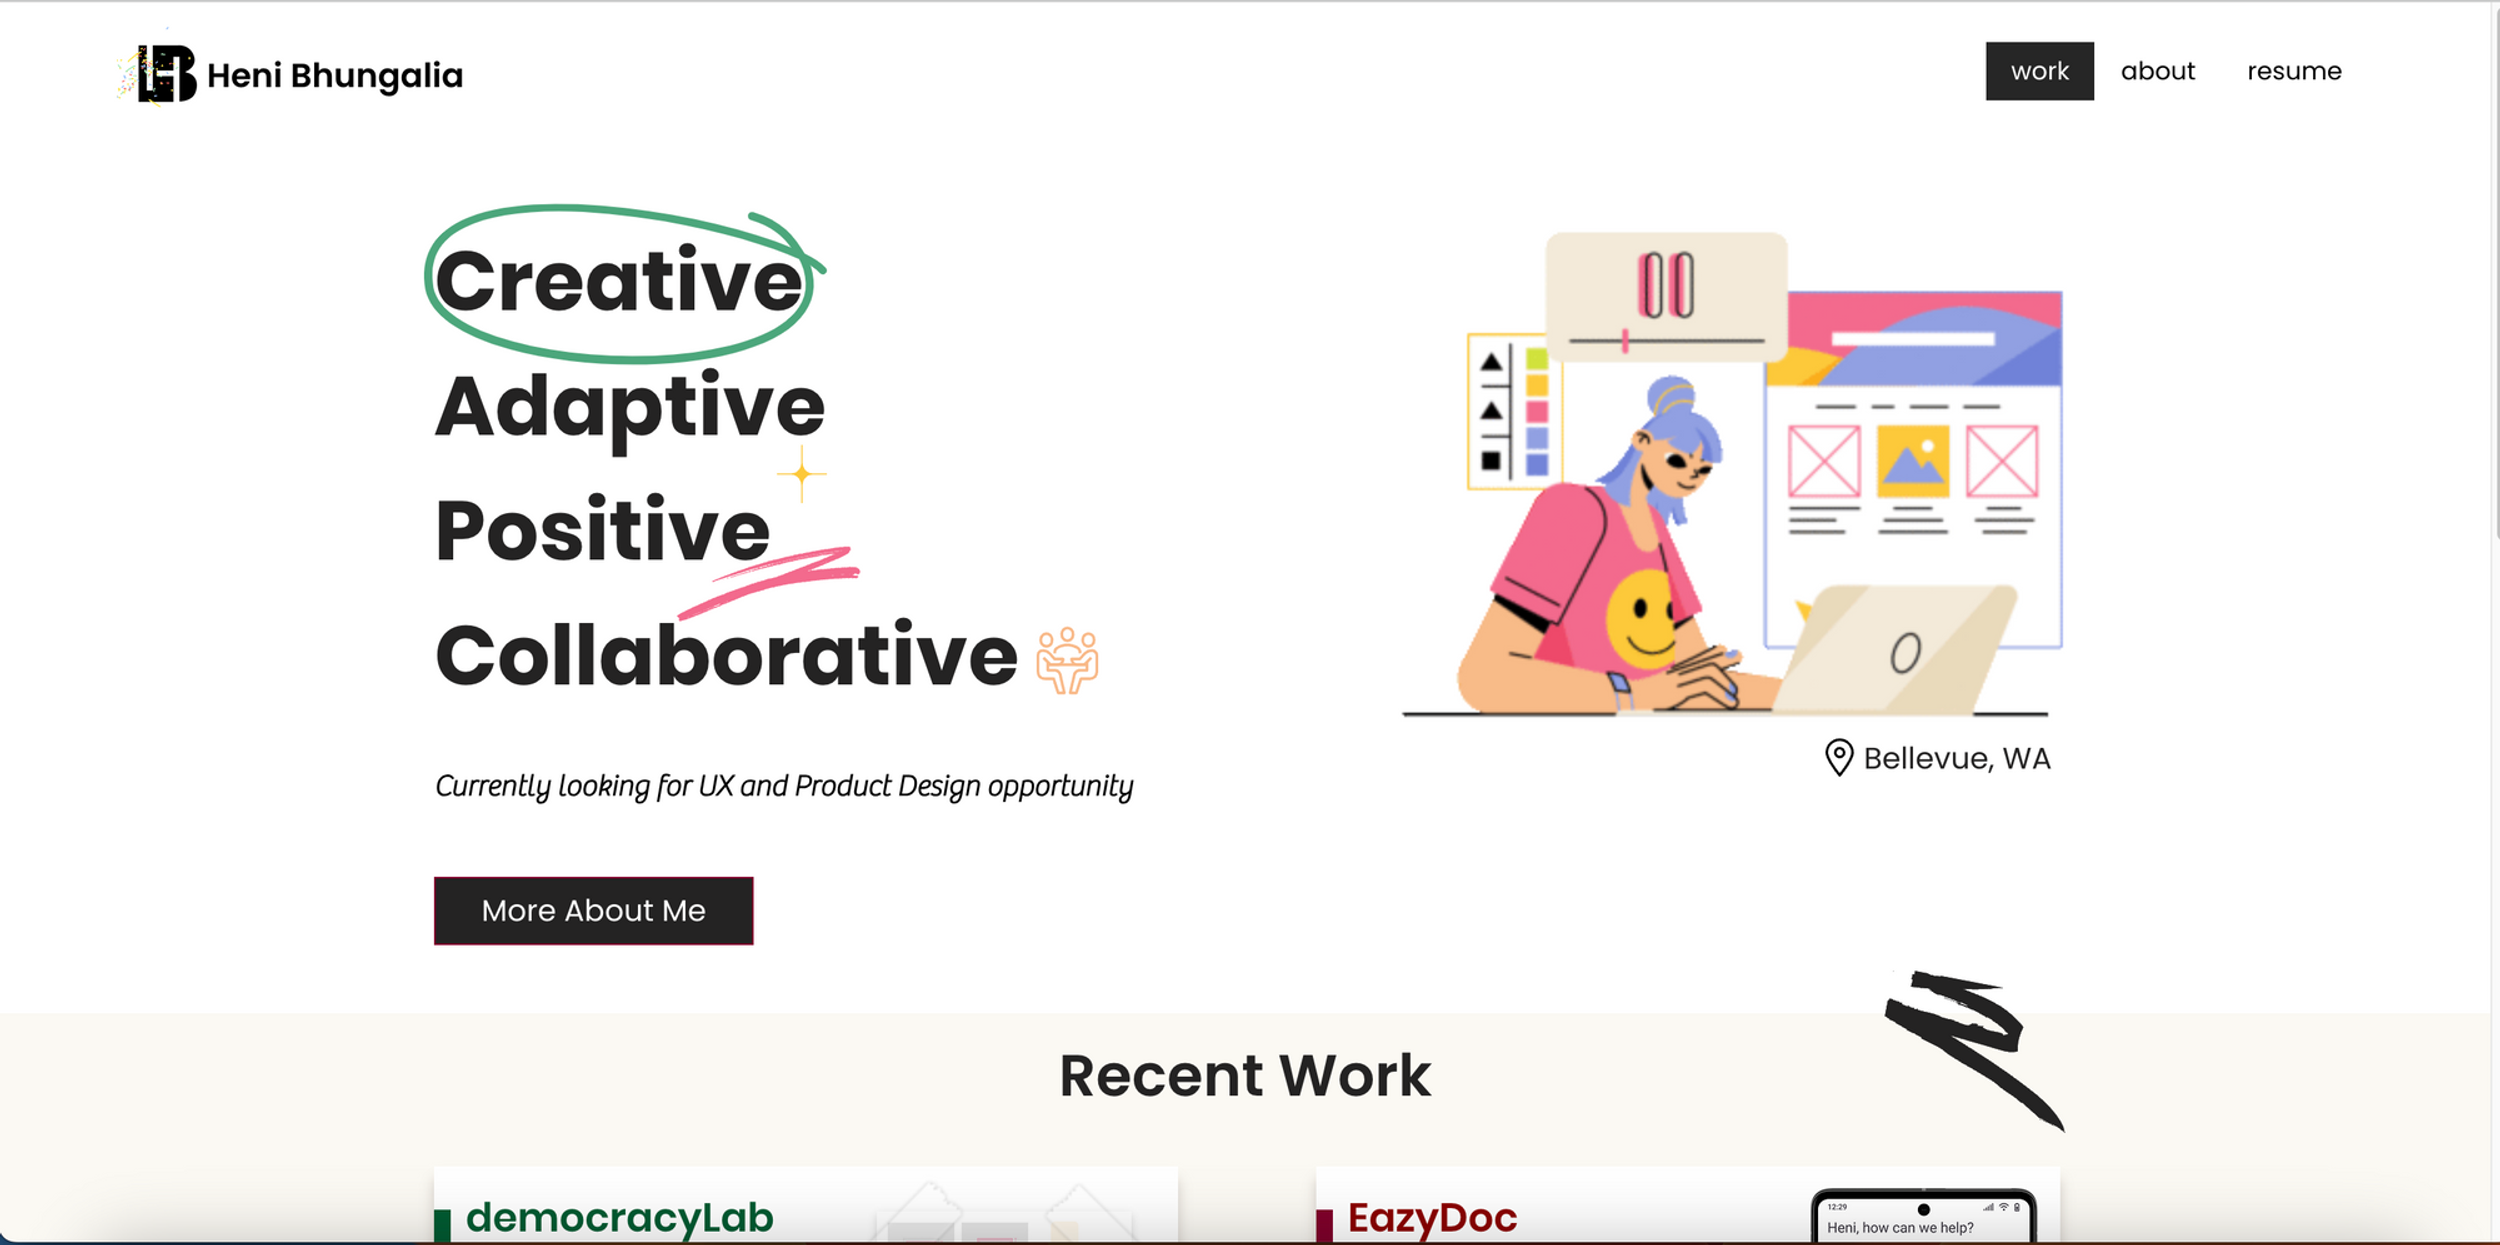 i Heni Bhungalia

Adaptive

Positive
—
Collaborative

about resume

 

 

Currently looking for UX and Product Design opportunity

More About Me

© Bellevue, WA

Recent Work

EazyDoc

democracylLab